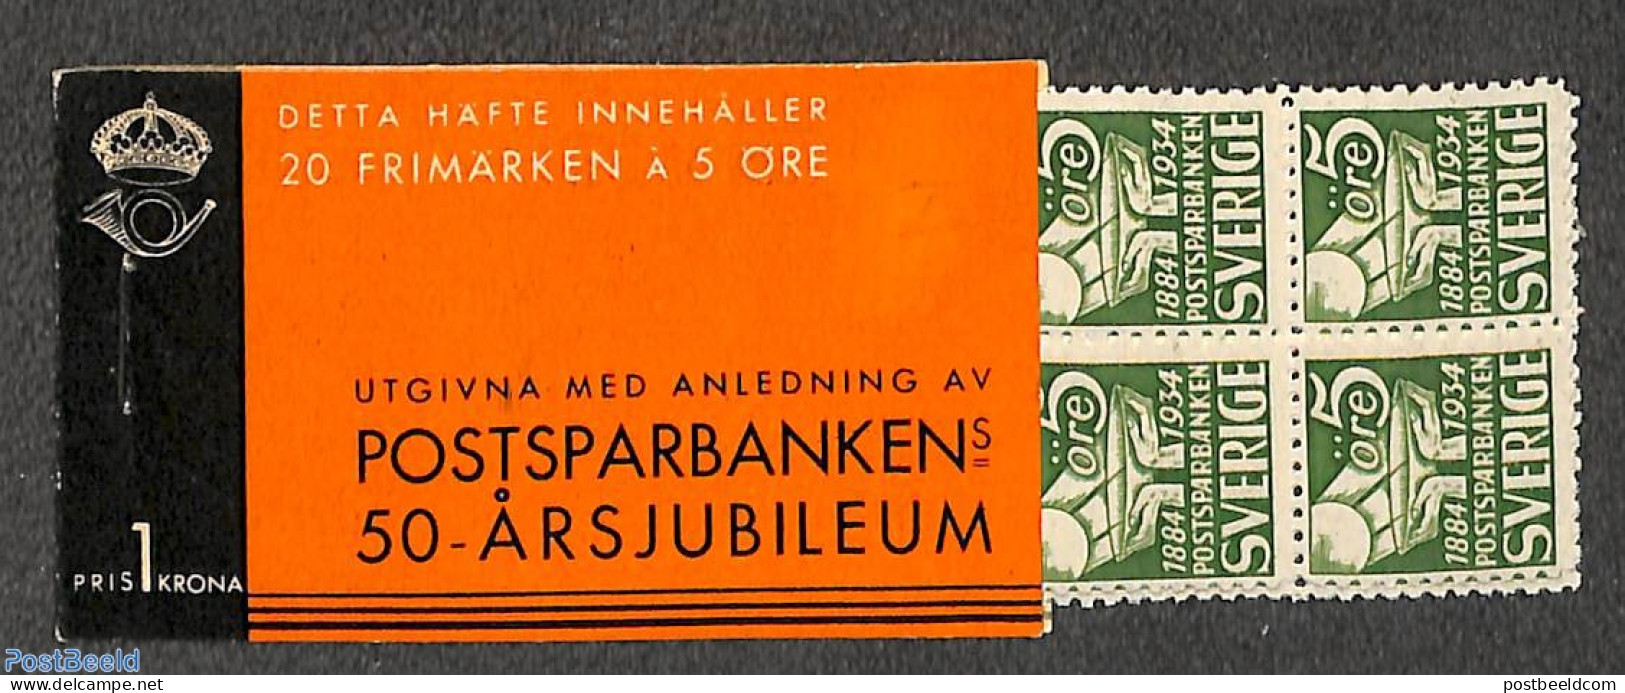 Sweden 1933 Postal Saving Bank, Type I, Booklet With 20 Stamps, Mint NH, Various - Stamp Booklets - Banking And Insura.. - Unused Stamps